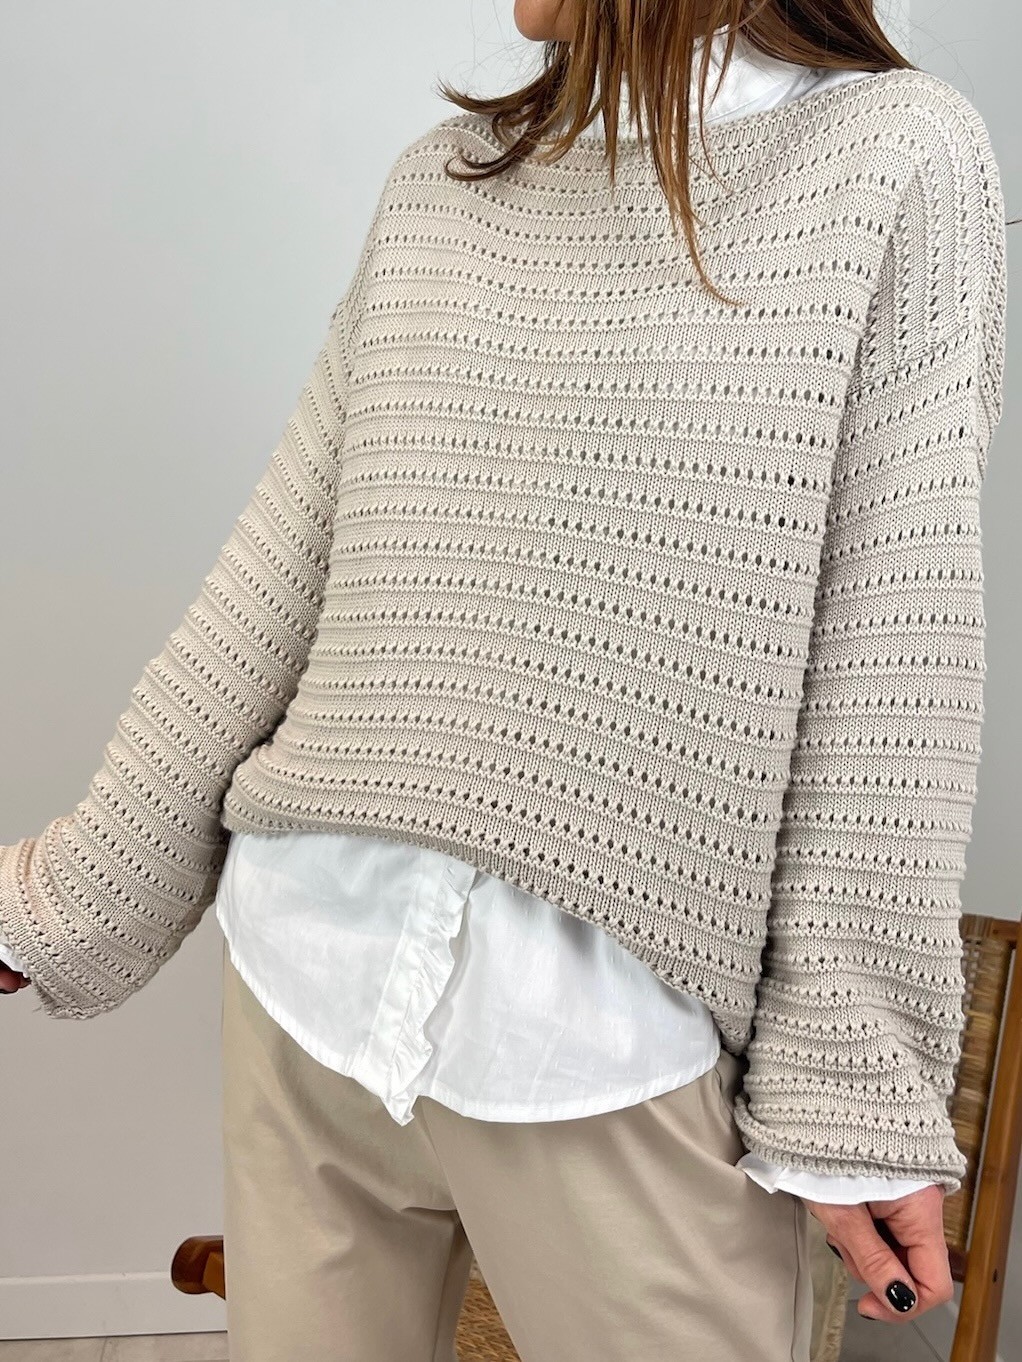 Pull maille ajourée beige